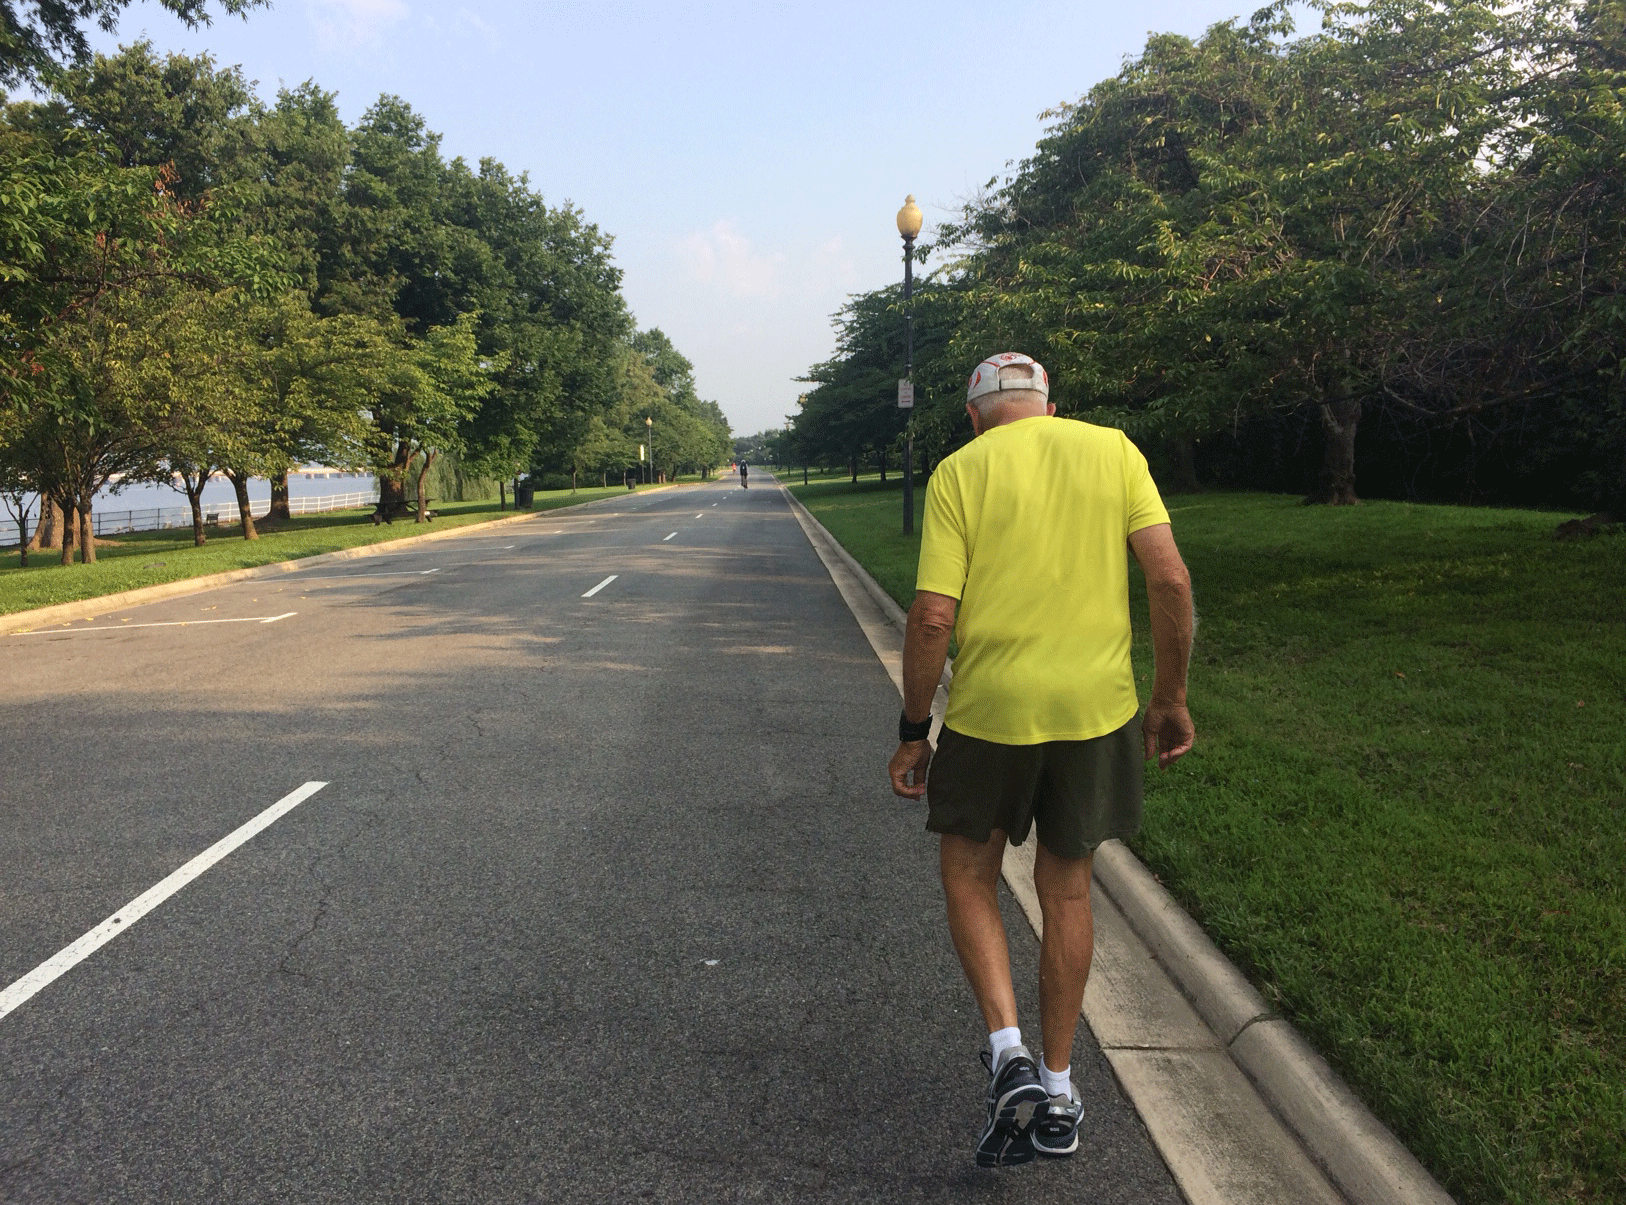 Richmond, who has run every Marine Corps Marathon since the race began more than 40 years ago, is the last remaining Groundpounder. (WTOP/Sarah Beth Hensley)